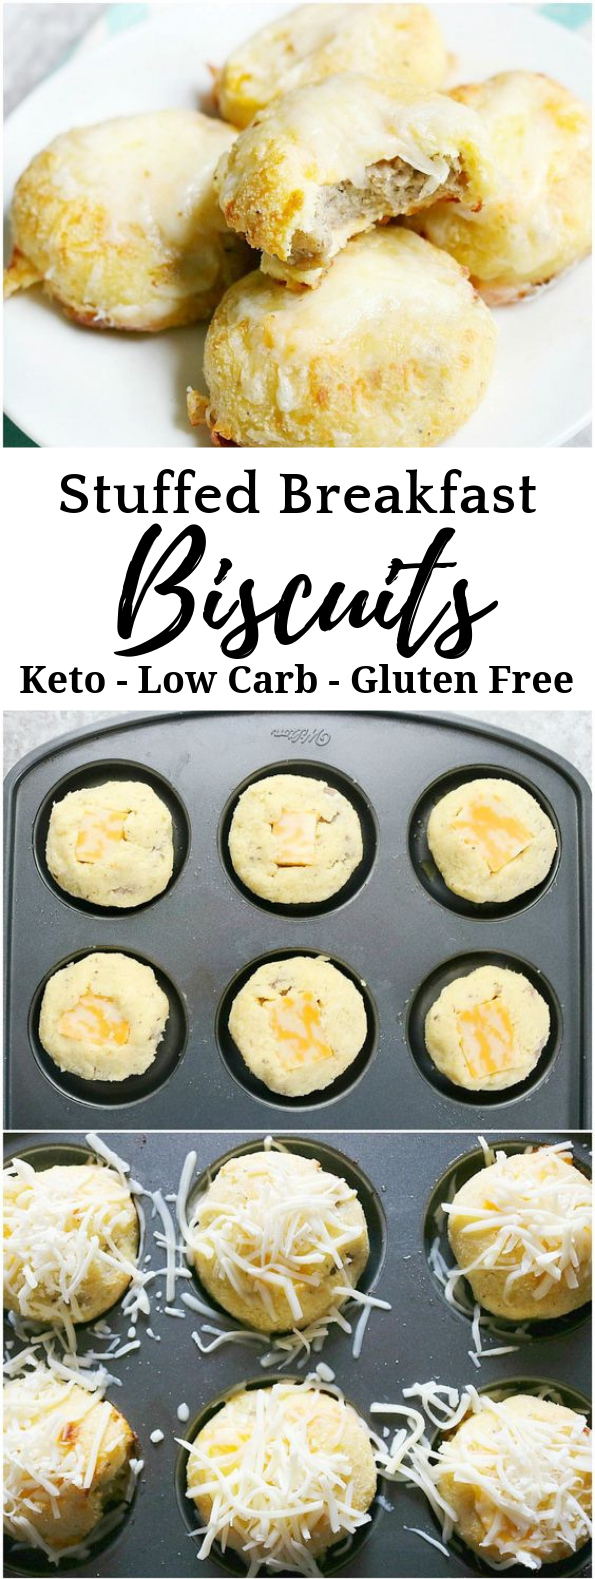 KETO BREAKFAST BISCUITS STUFFED WITH SAUSAGE AND CHEESE #ketogenic  #ketodiet